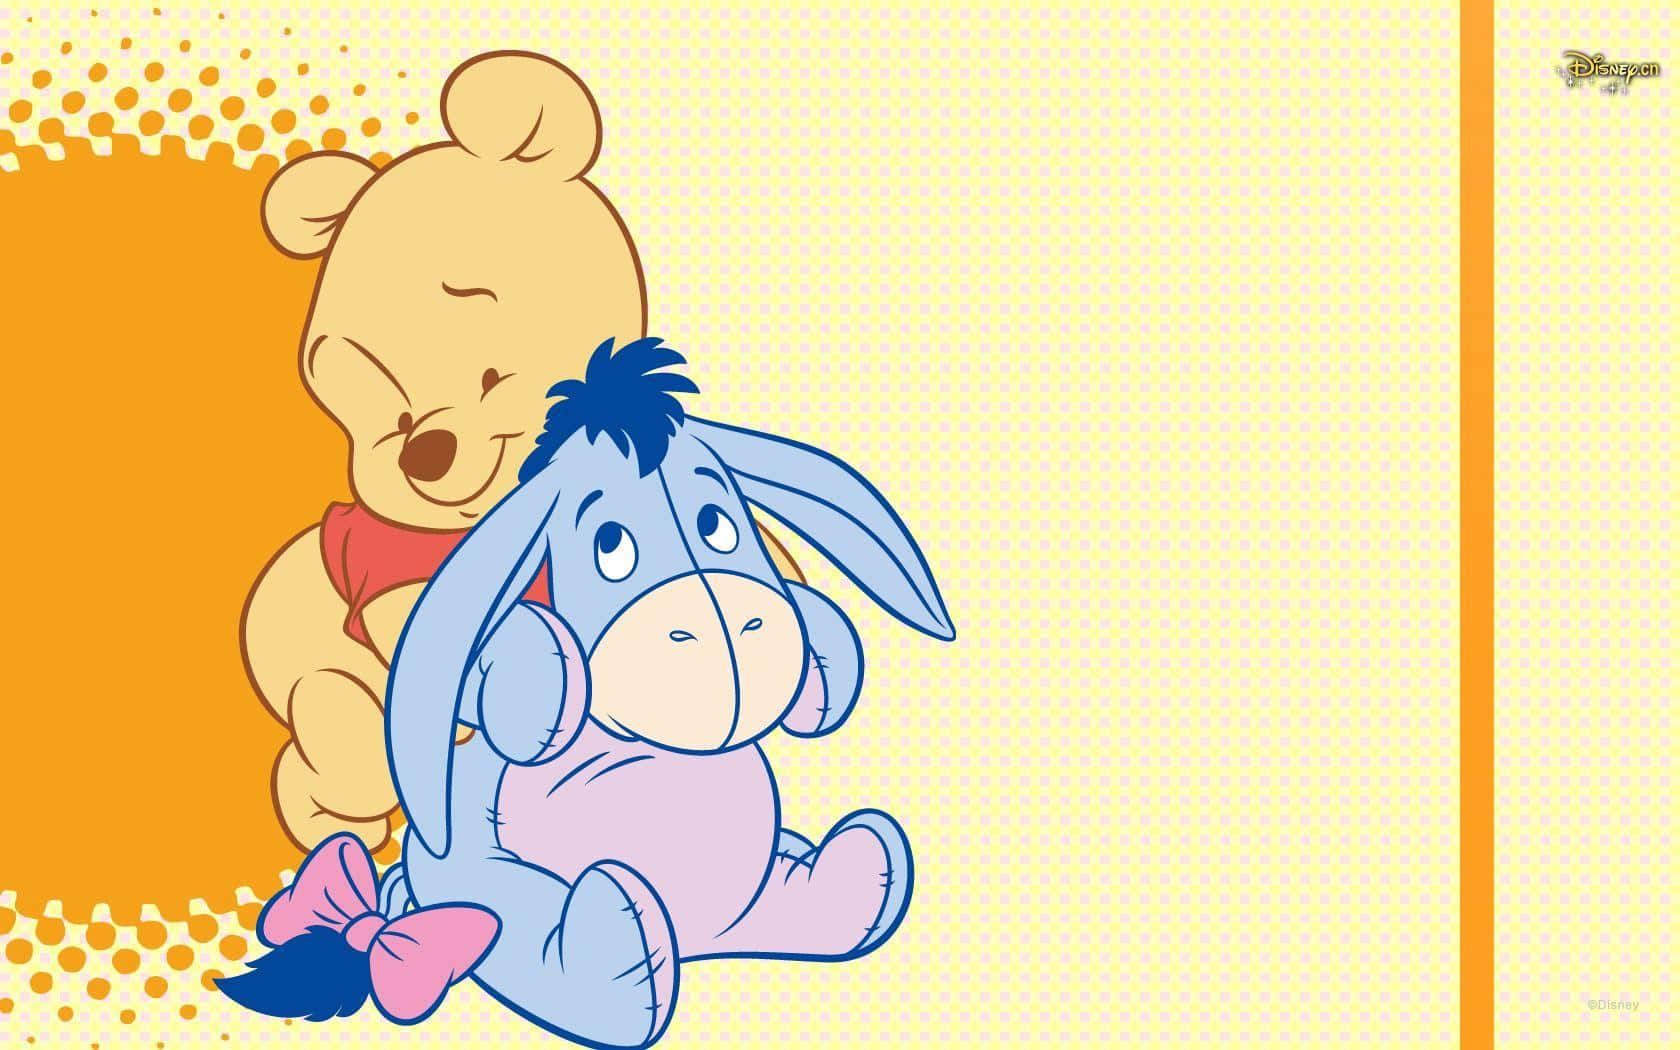 Celebrate Friendships With Winnie The Pooh!